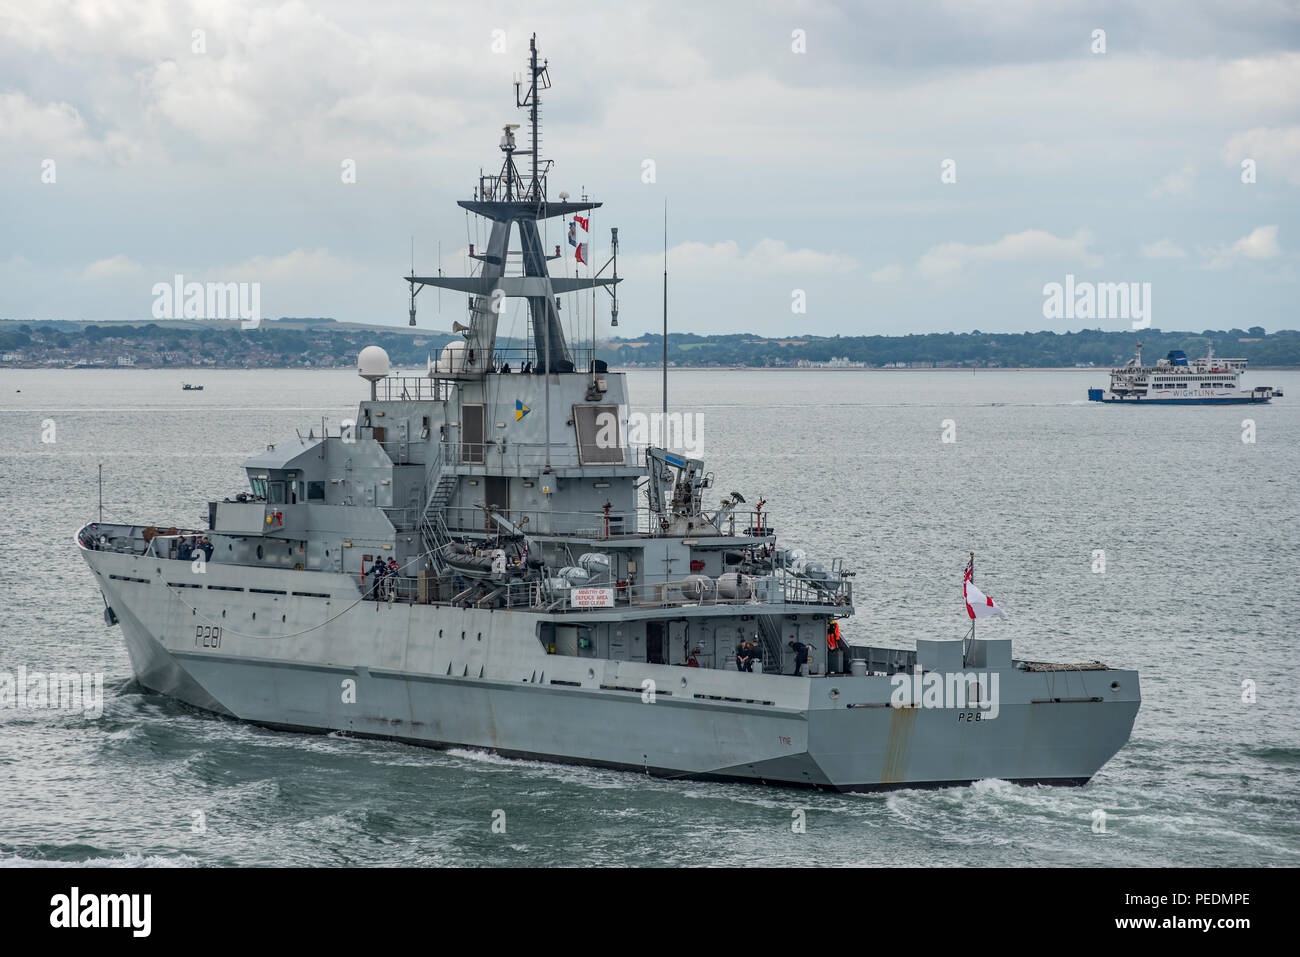 The British Royal Navy River Class (Batch 1) OPV, HMS Tyne, returned to active service at Portsmouth, UK on 14/8/18 after a short period in reserve. Stock Photo